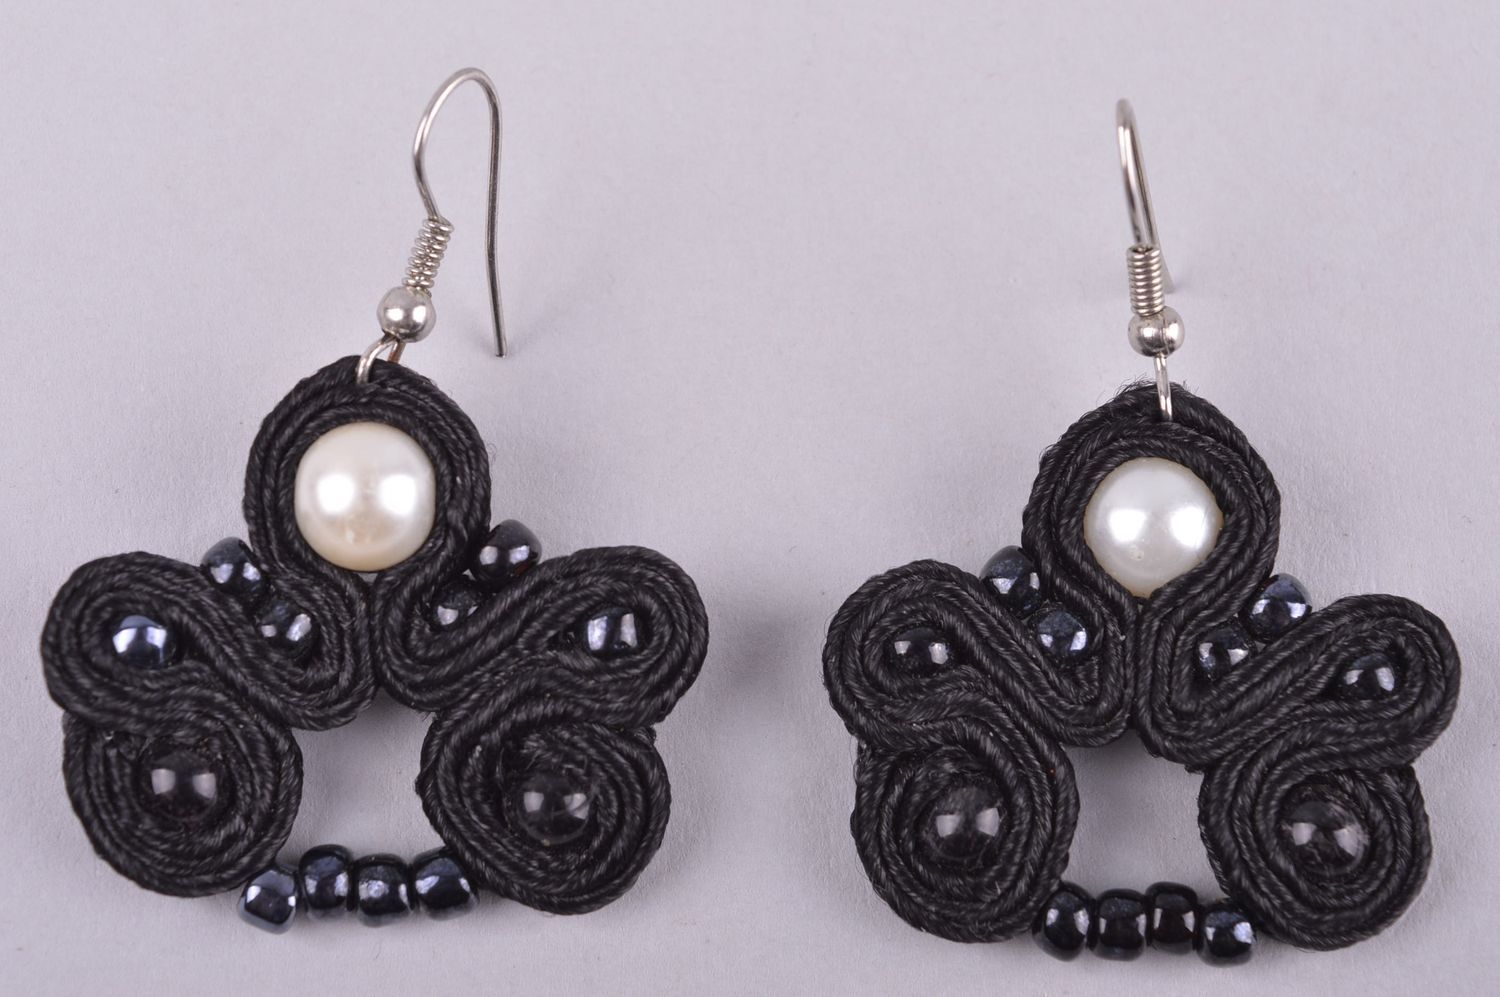 Large handmade textile earrings soutache jewelry designs accessories for girls photo 3